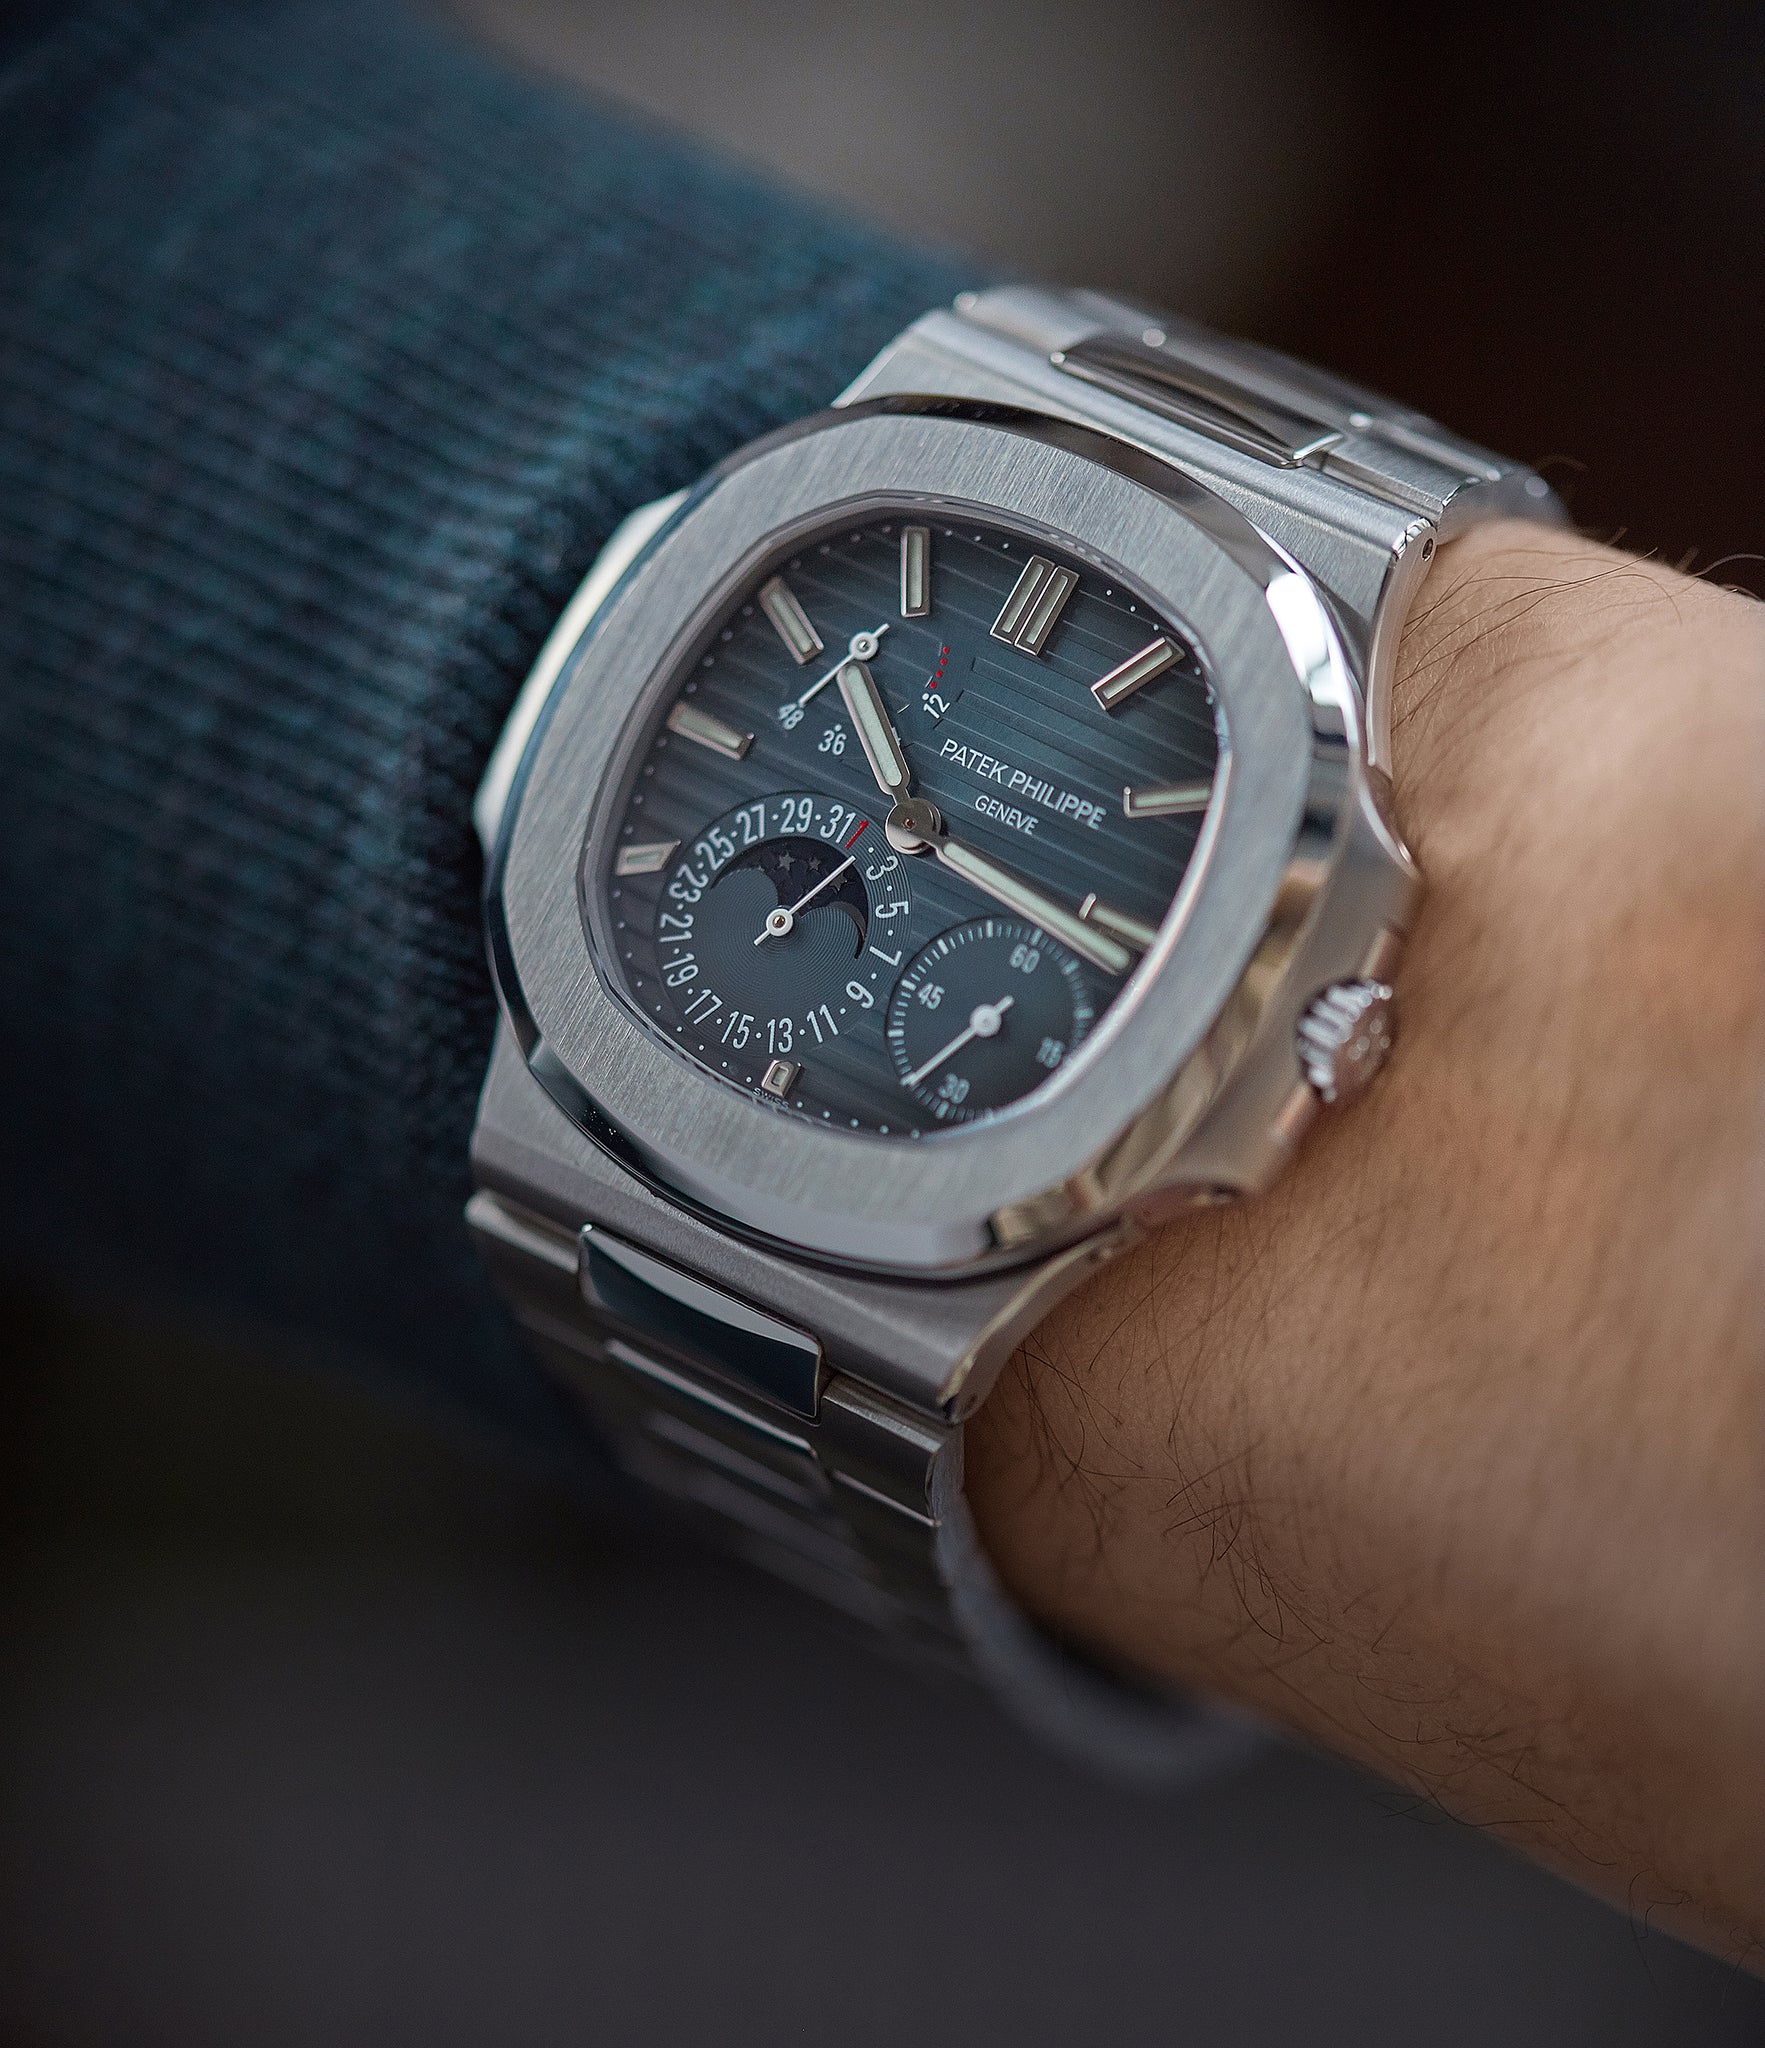 wristwatch Patek Philippe Nautilus Moon Phase 5712/1A-001 steel pre-owned watch for sale online at A Collected Man London UK specialist of rare watches